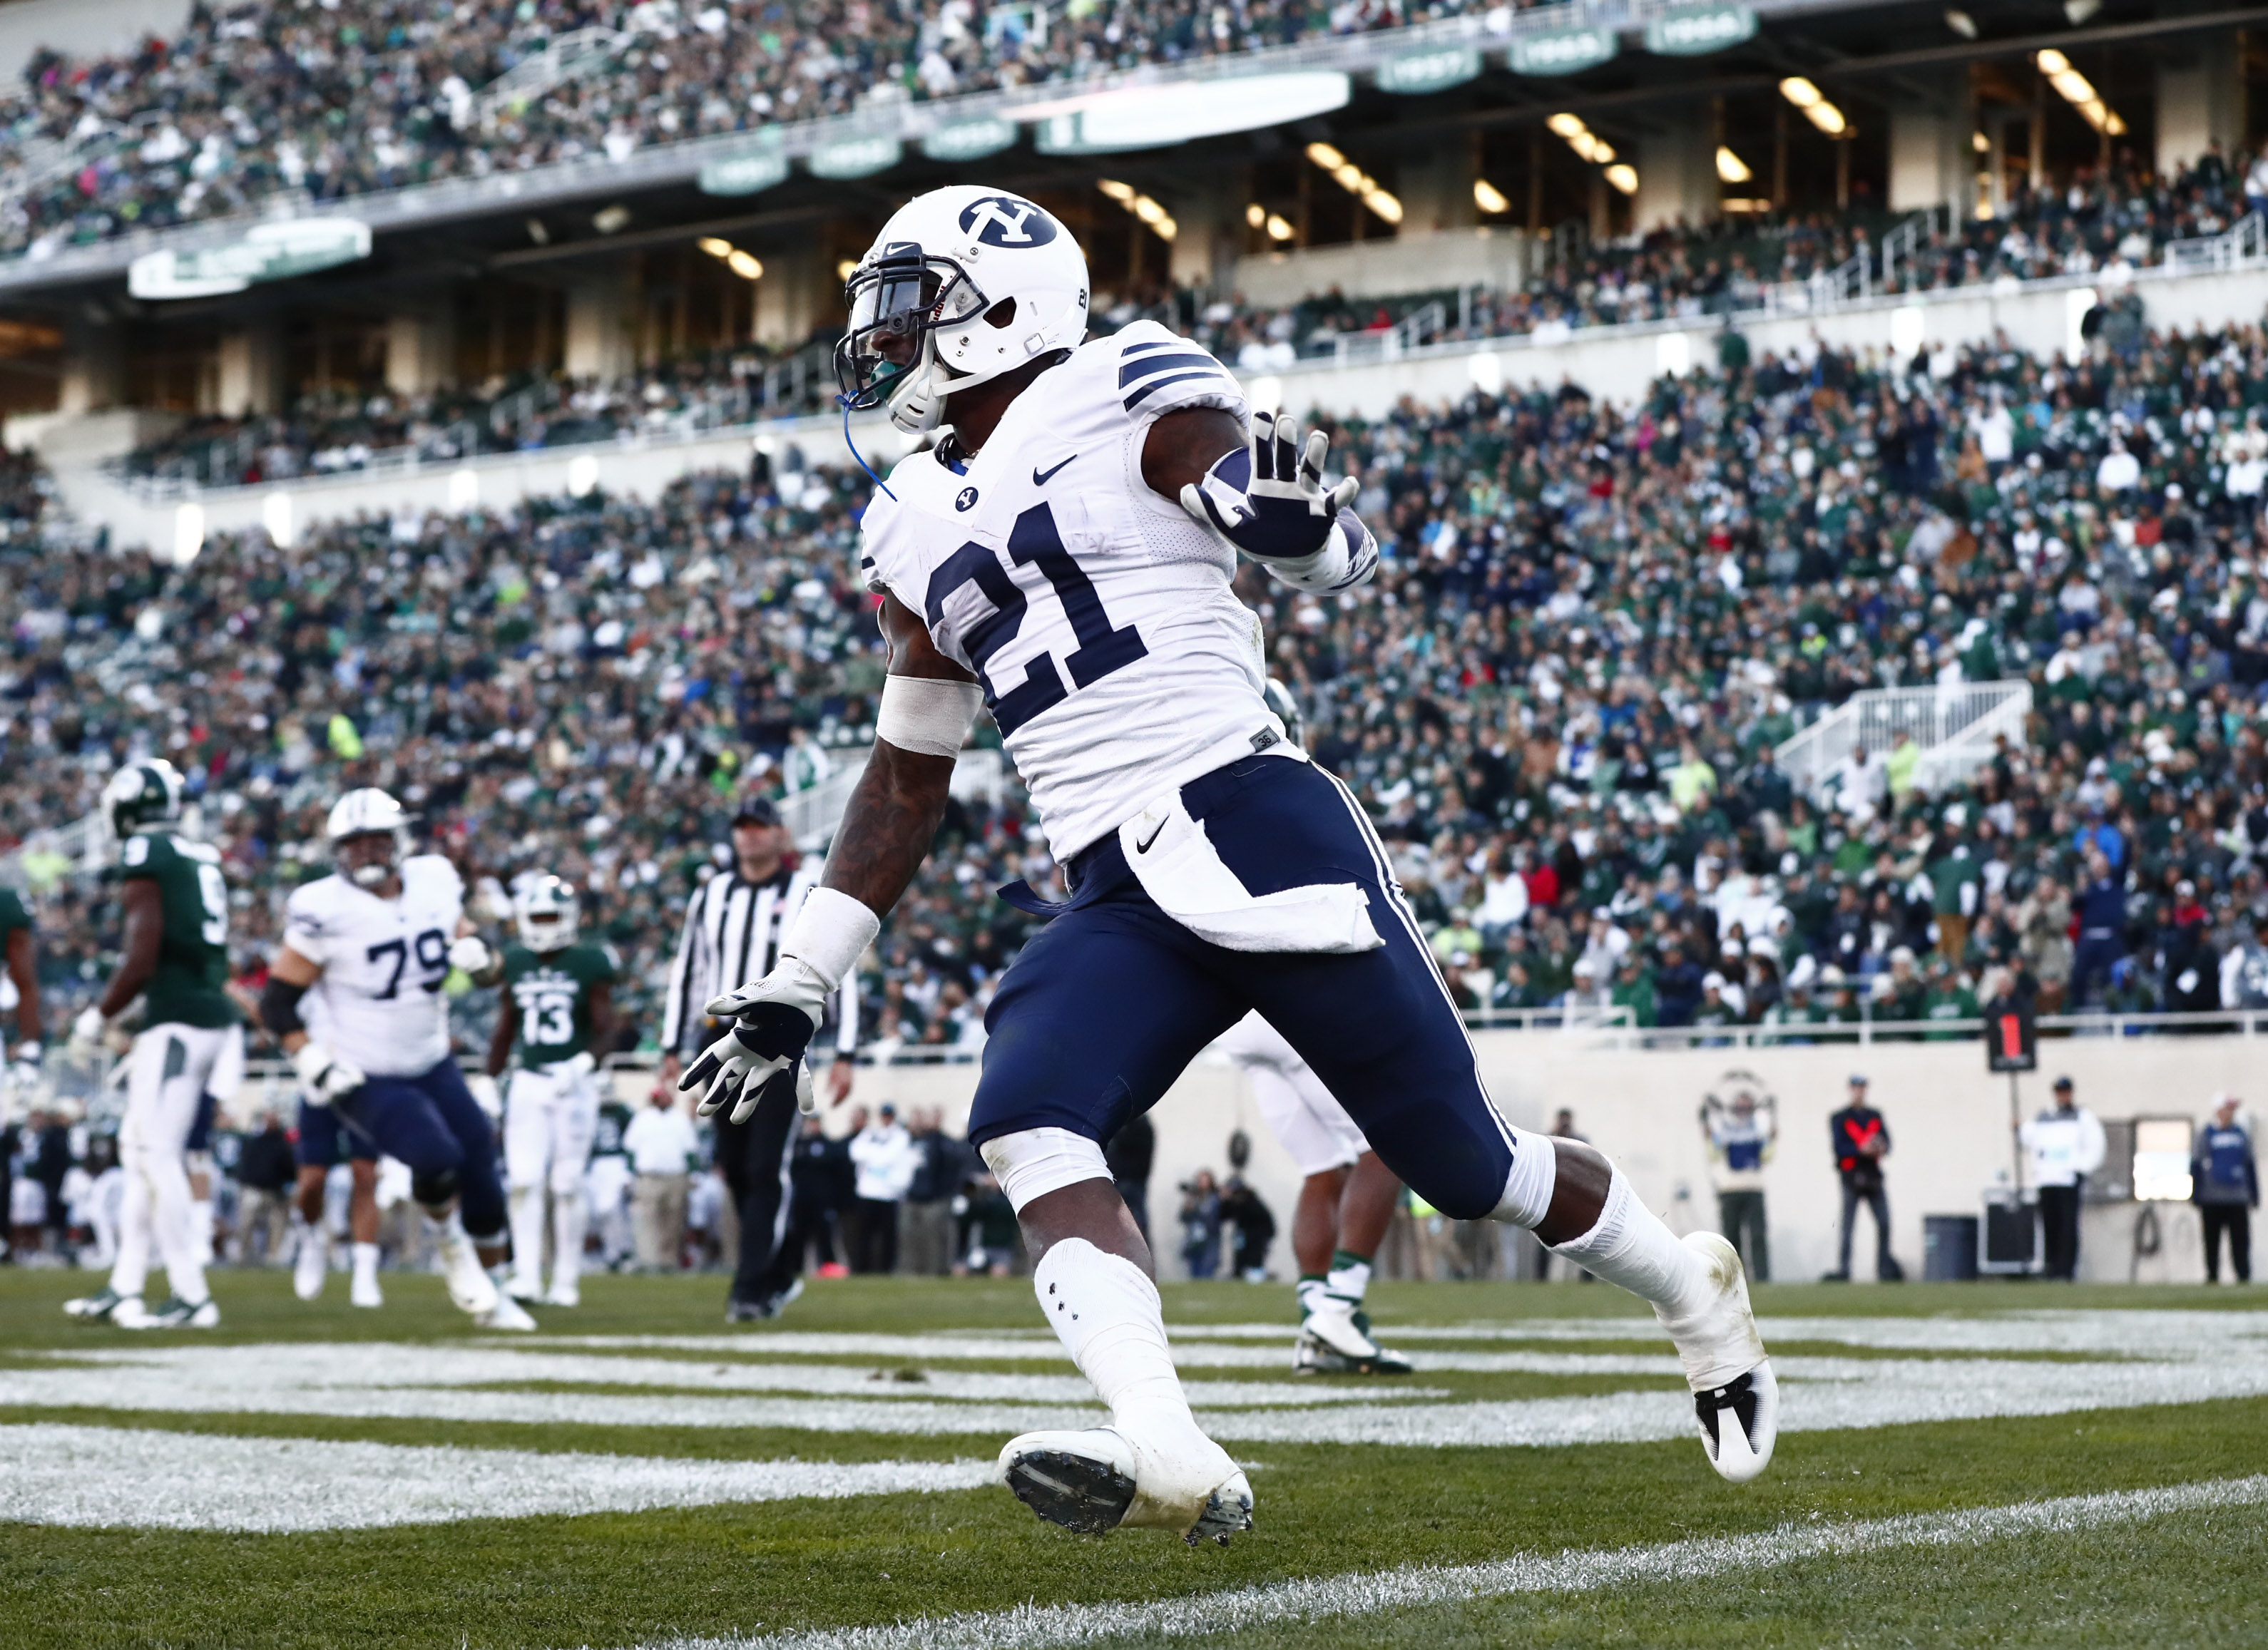 Jamaal Williams celebrates after scoring a touchdown against Michigan State. (BYU Photo)